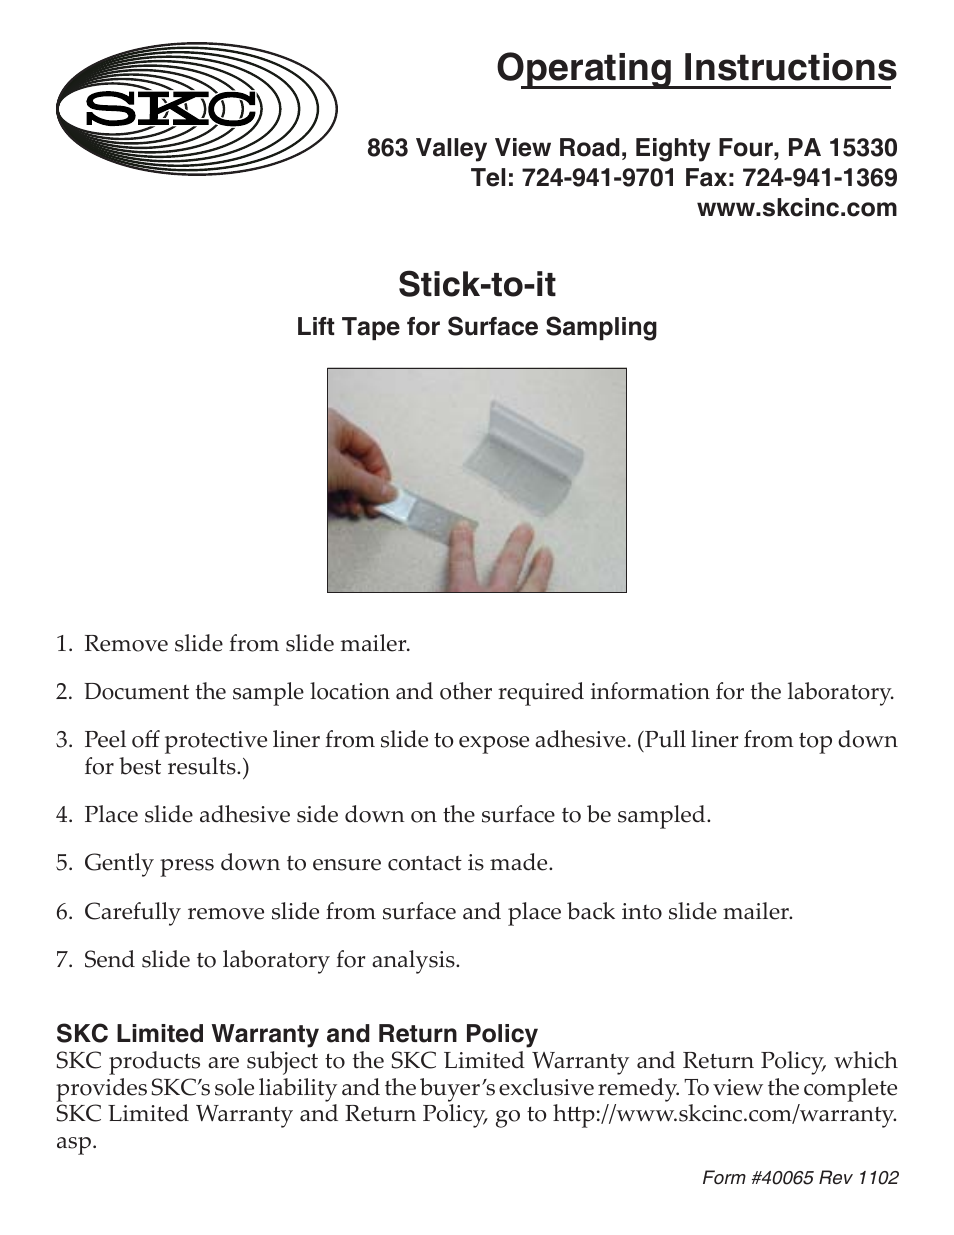 225-9808 Stick-to-it Lift Tape for Surface Sampling